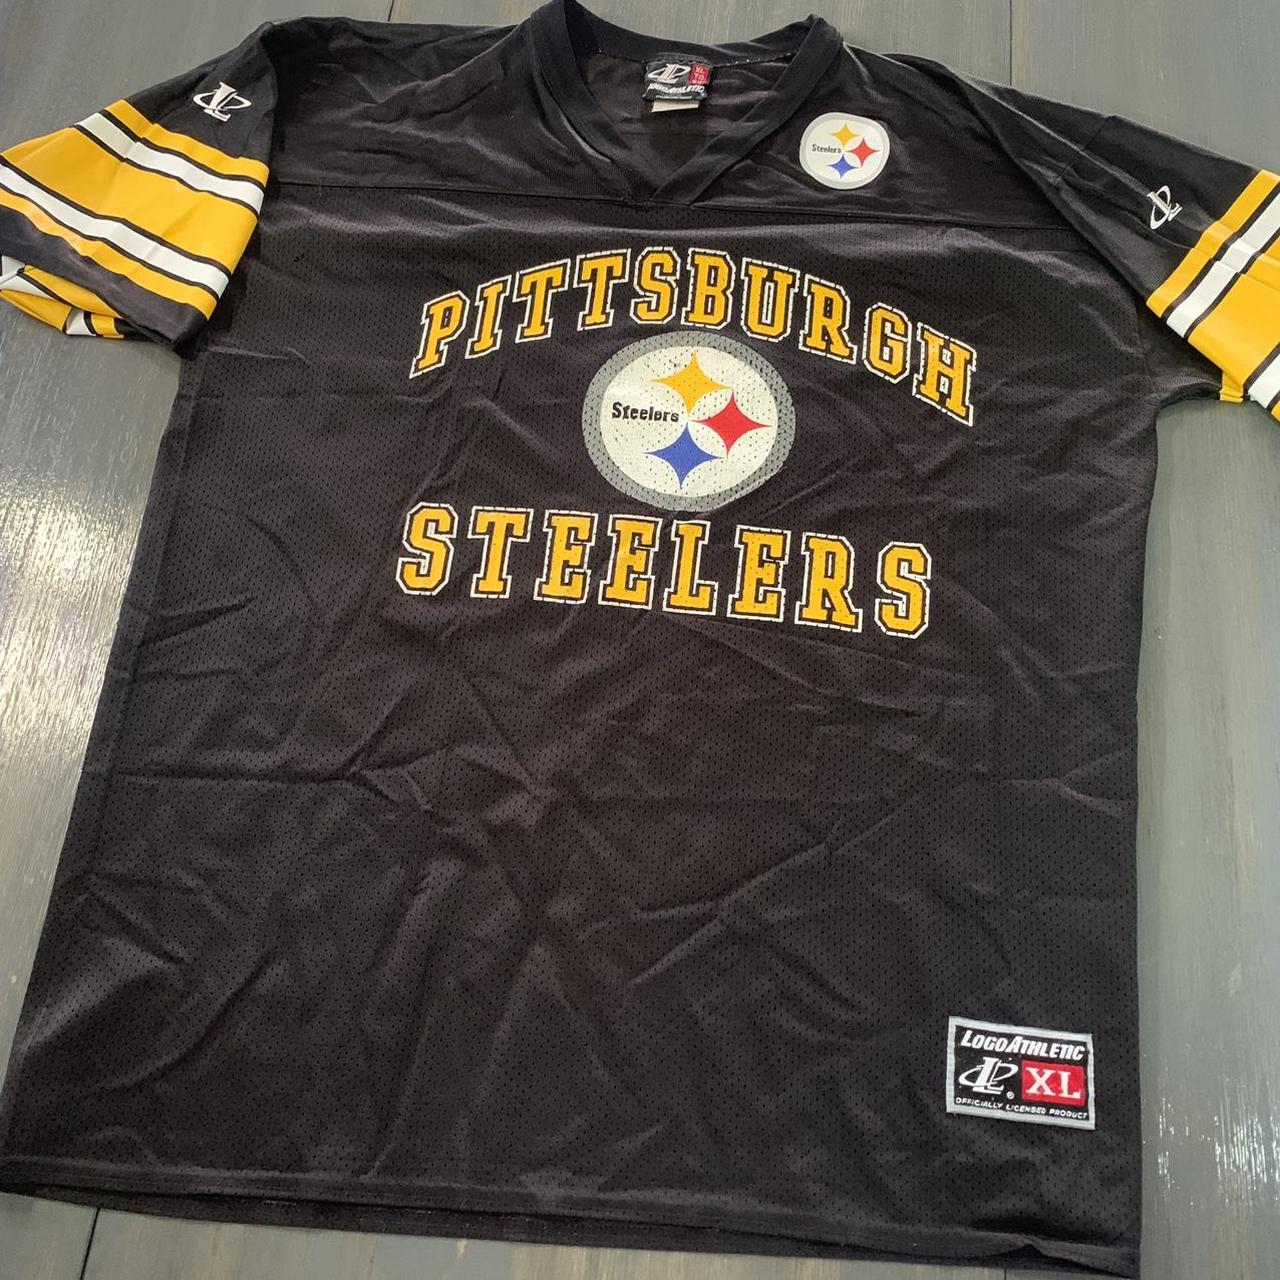 Vintage 90s Clothing NFL Pittsburgh Steelers Football Men Size 